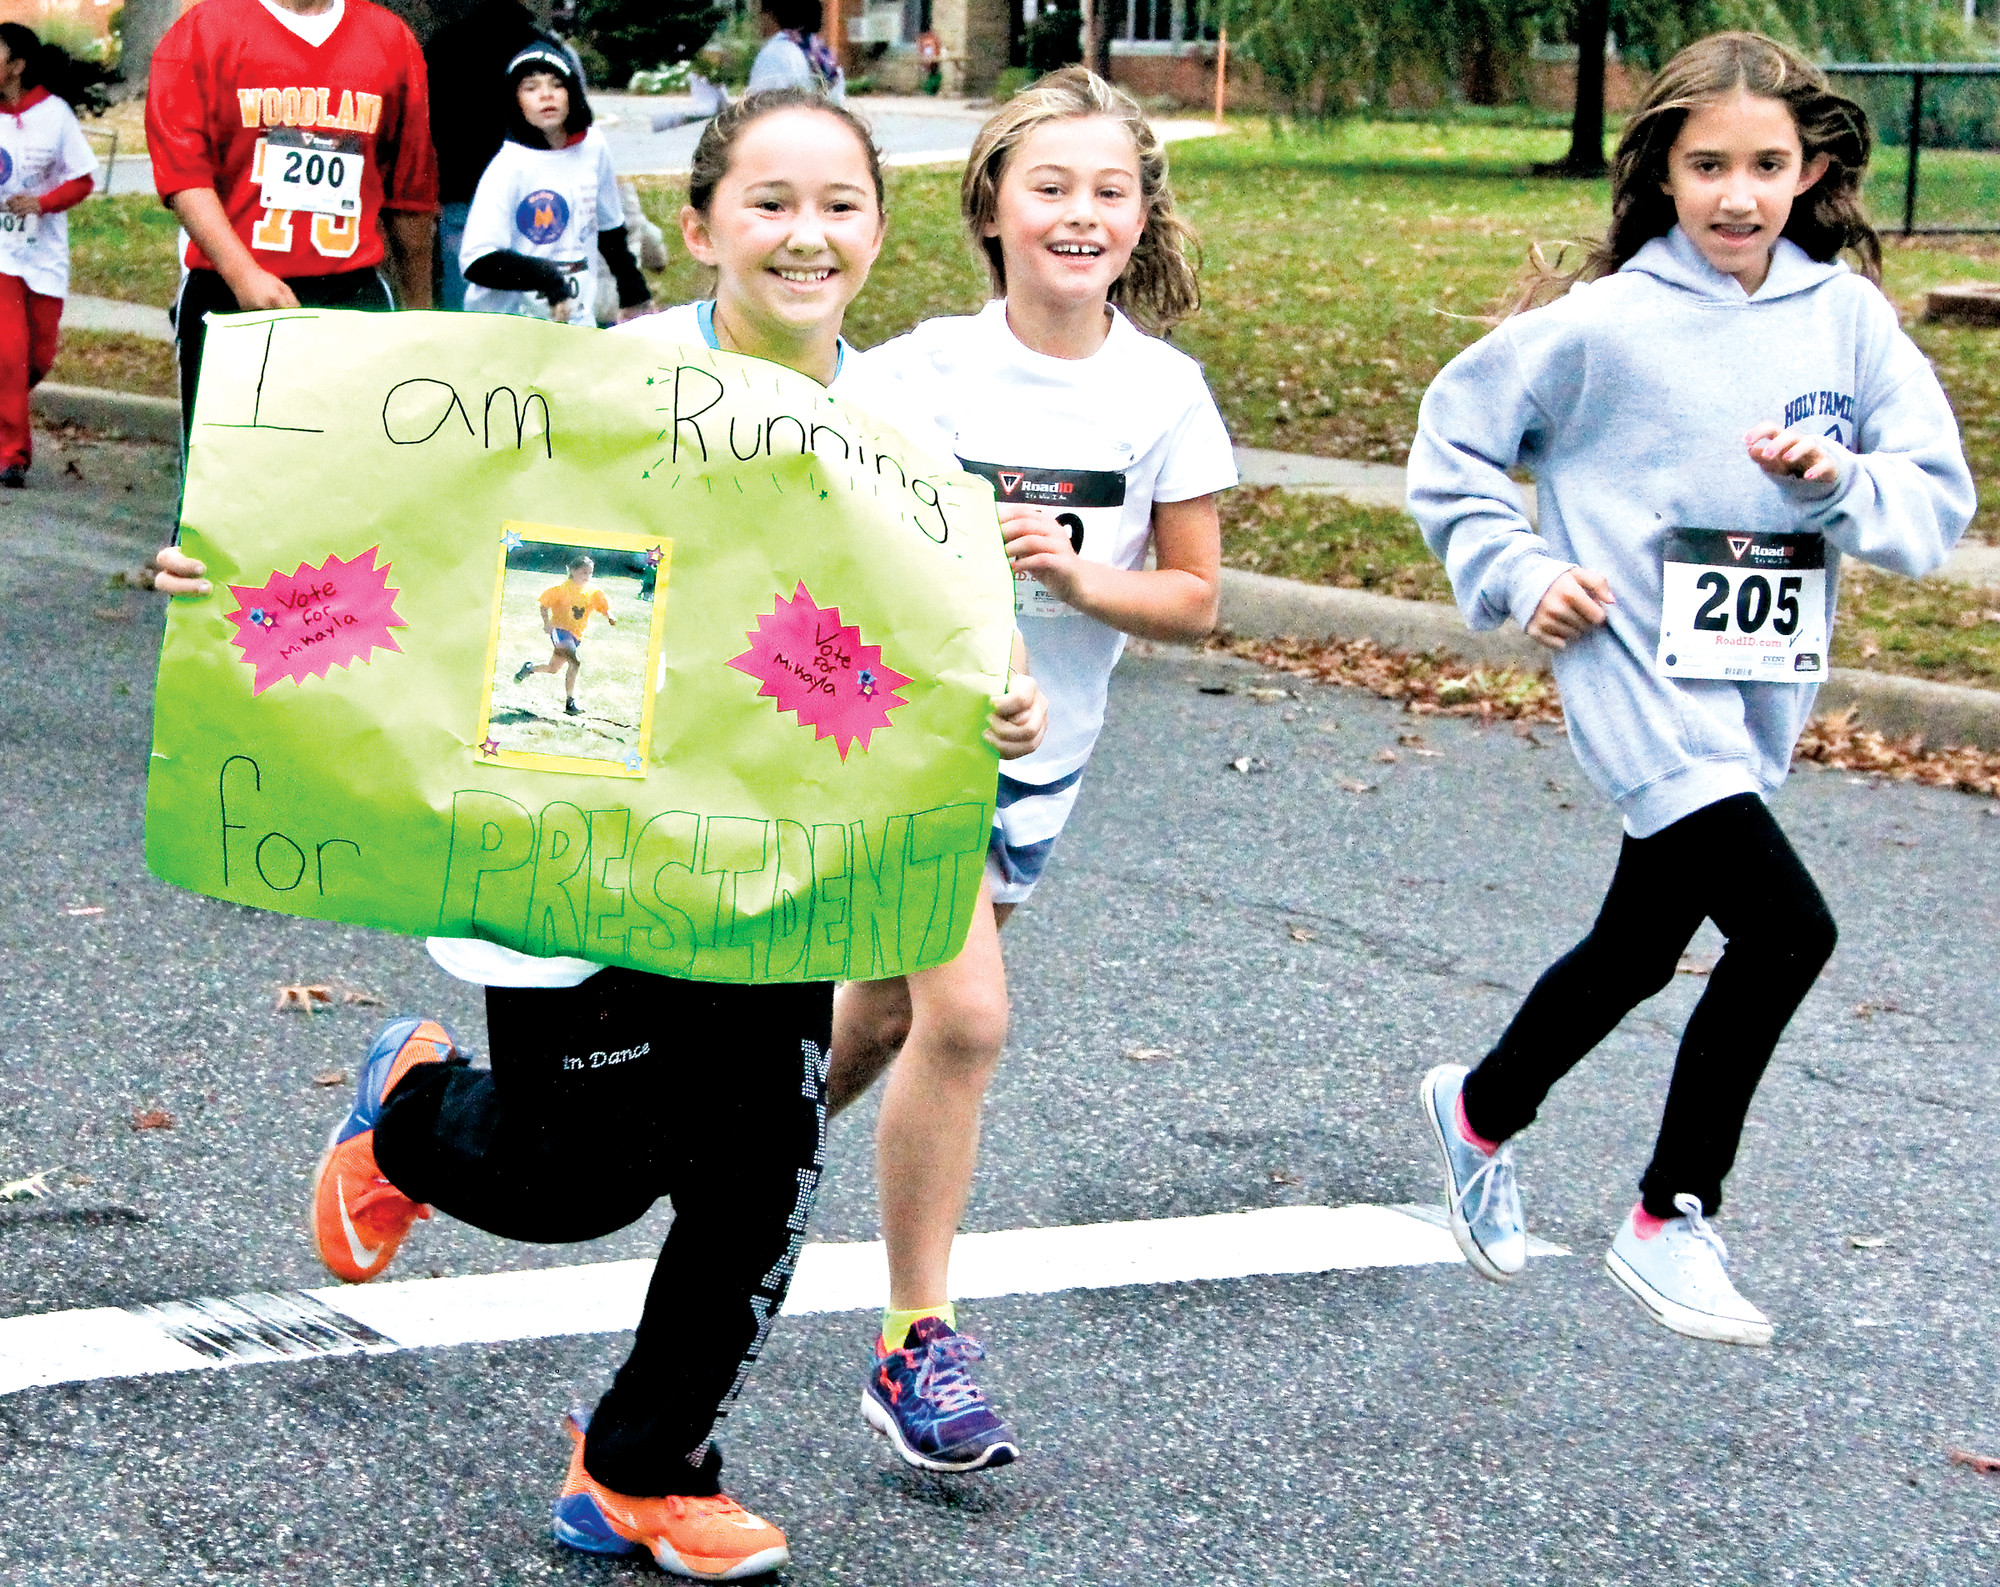 Could Trump keep up? Fifth-grader Mikayla Verdi’s intentions were clear at last Sunday’s McVey Elementary School 5K race, though her party affiliation was not.